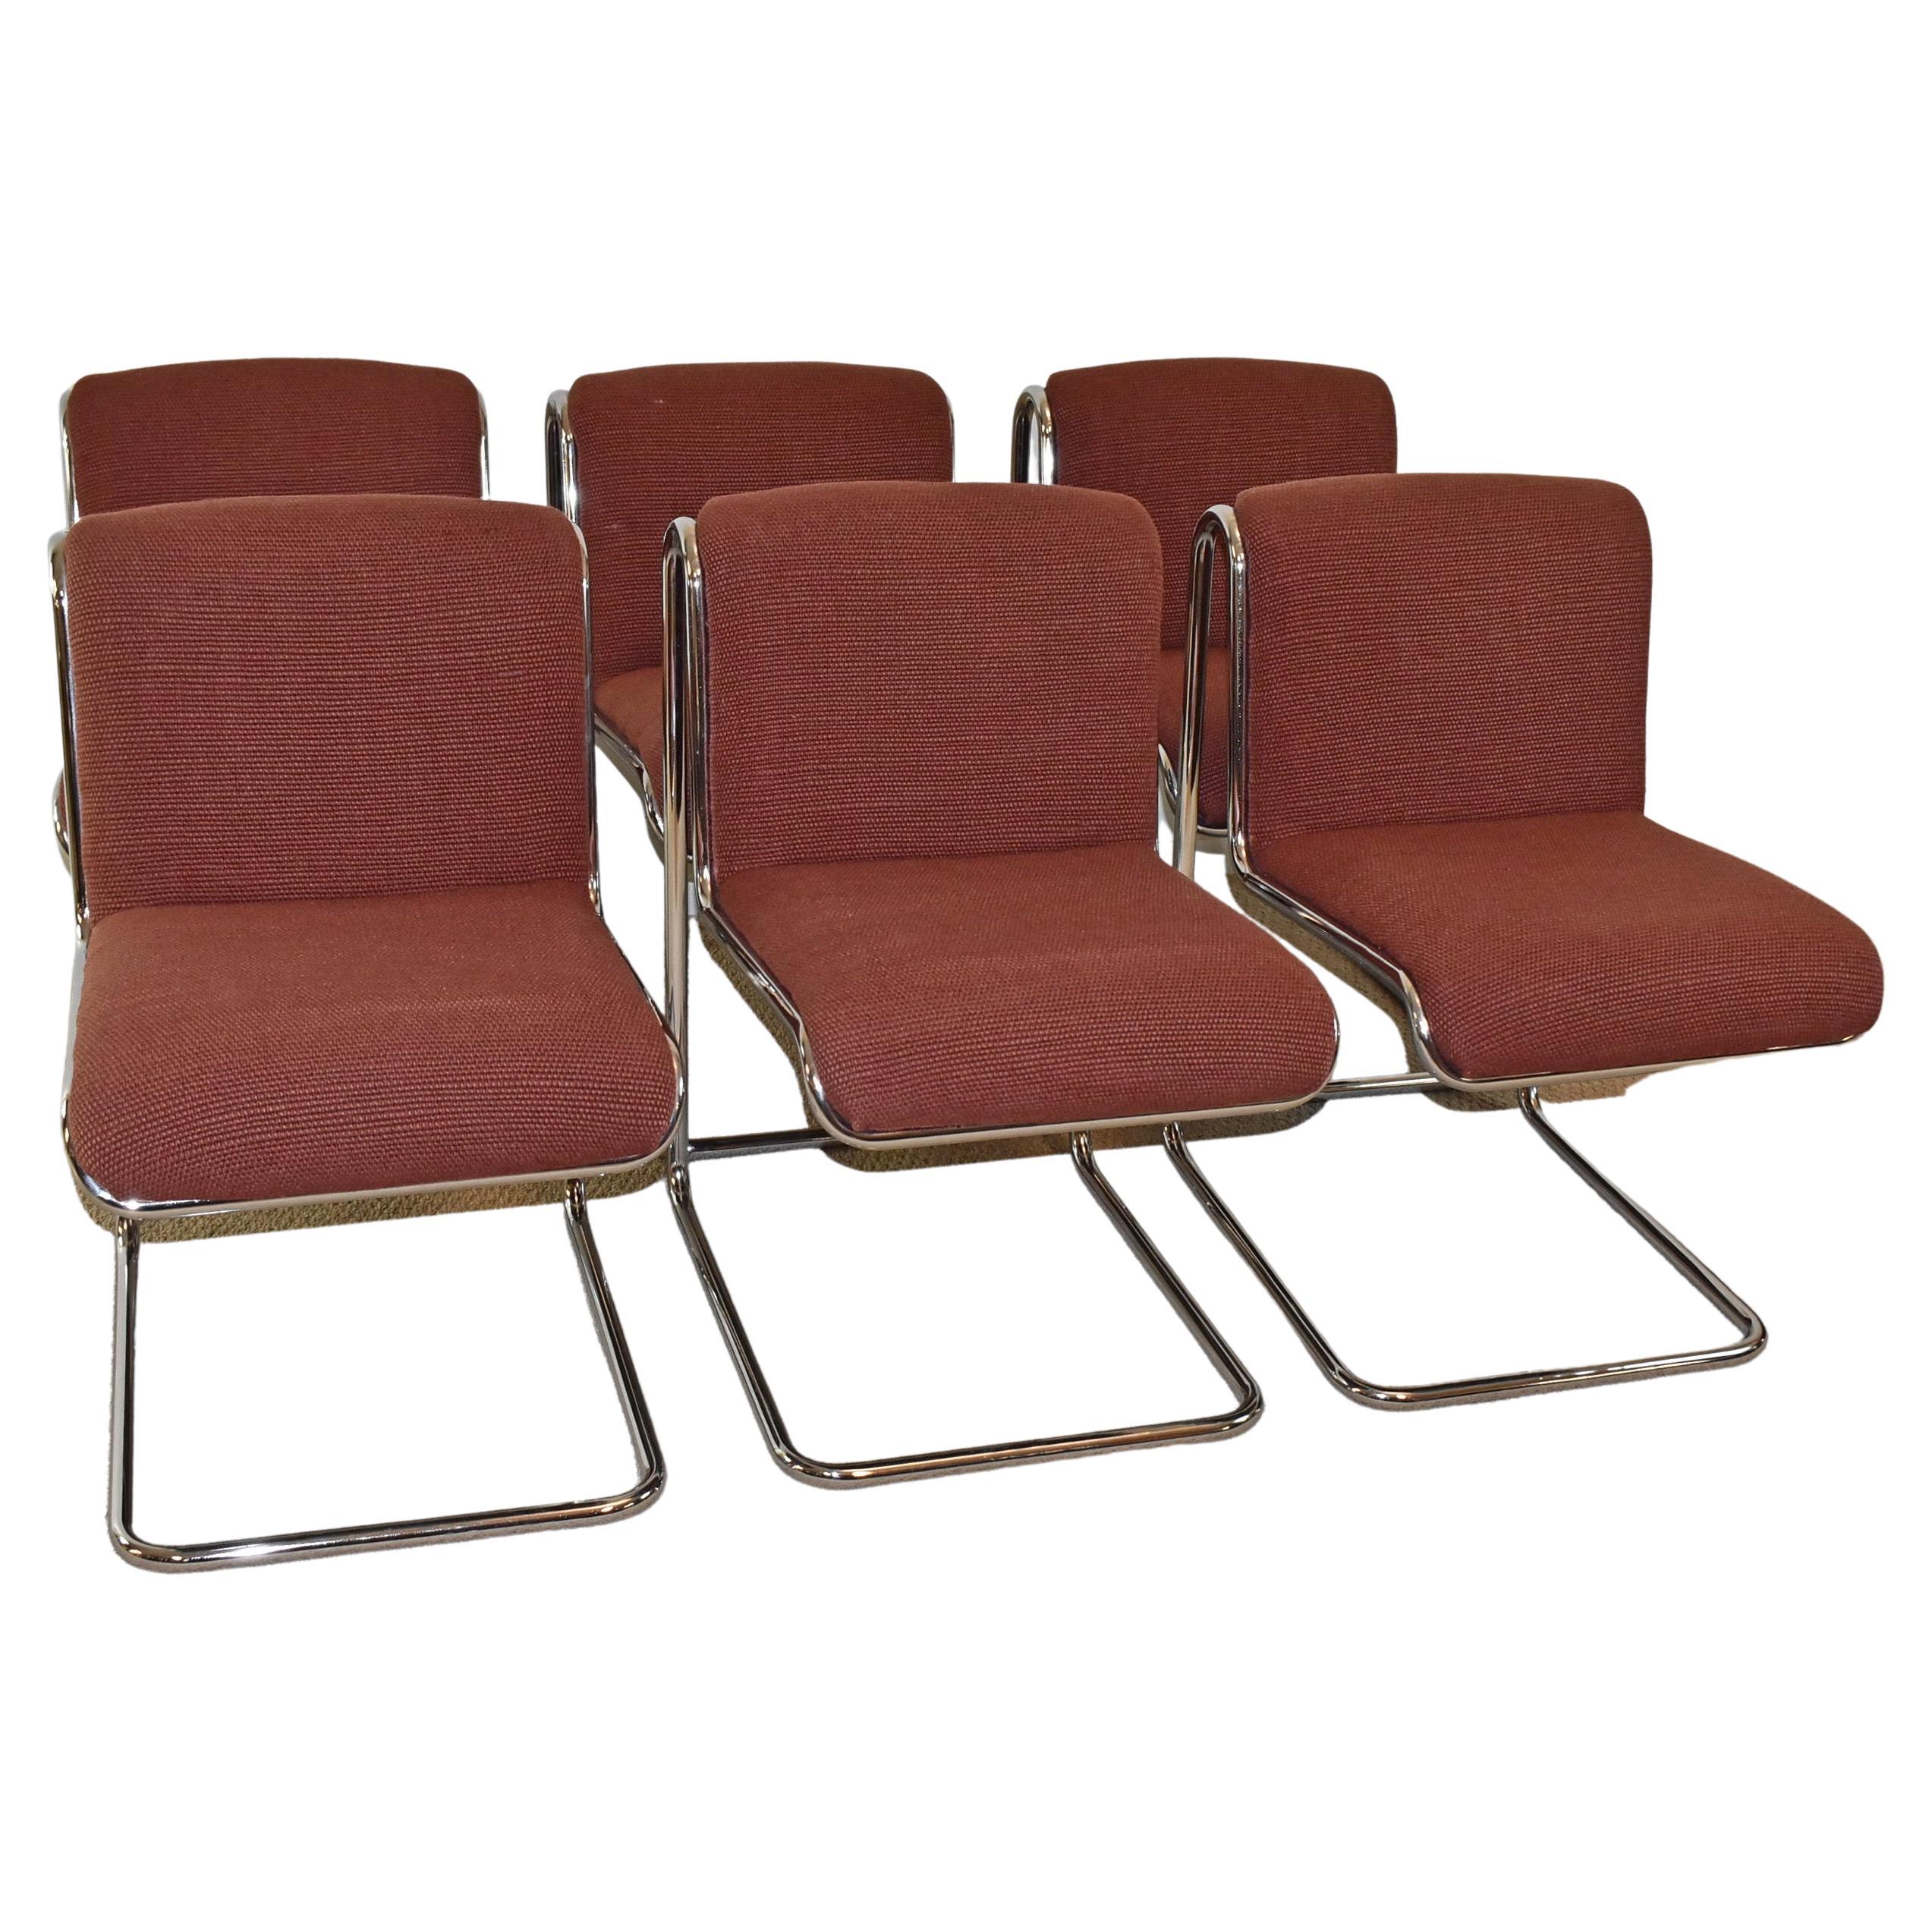 Set of 6 Thonet Chrome Upholstered Dining Chairs For Sale